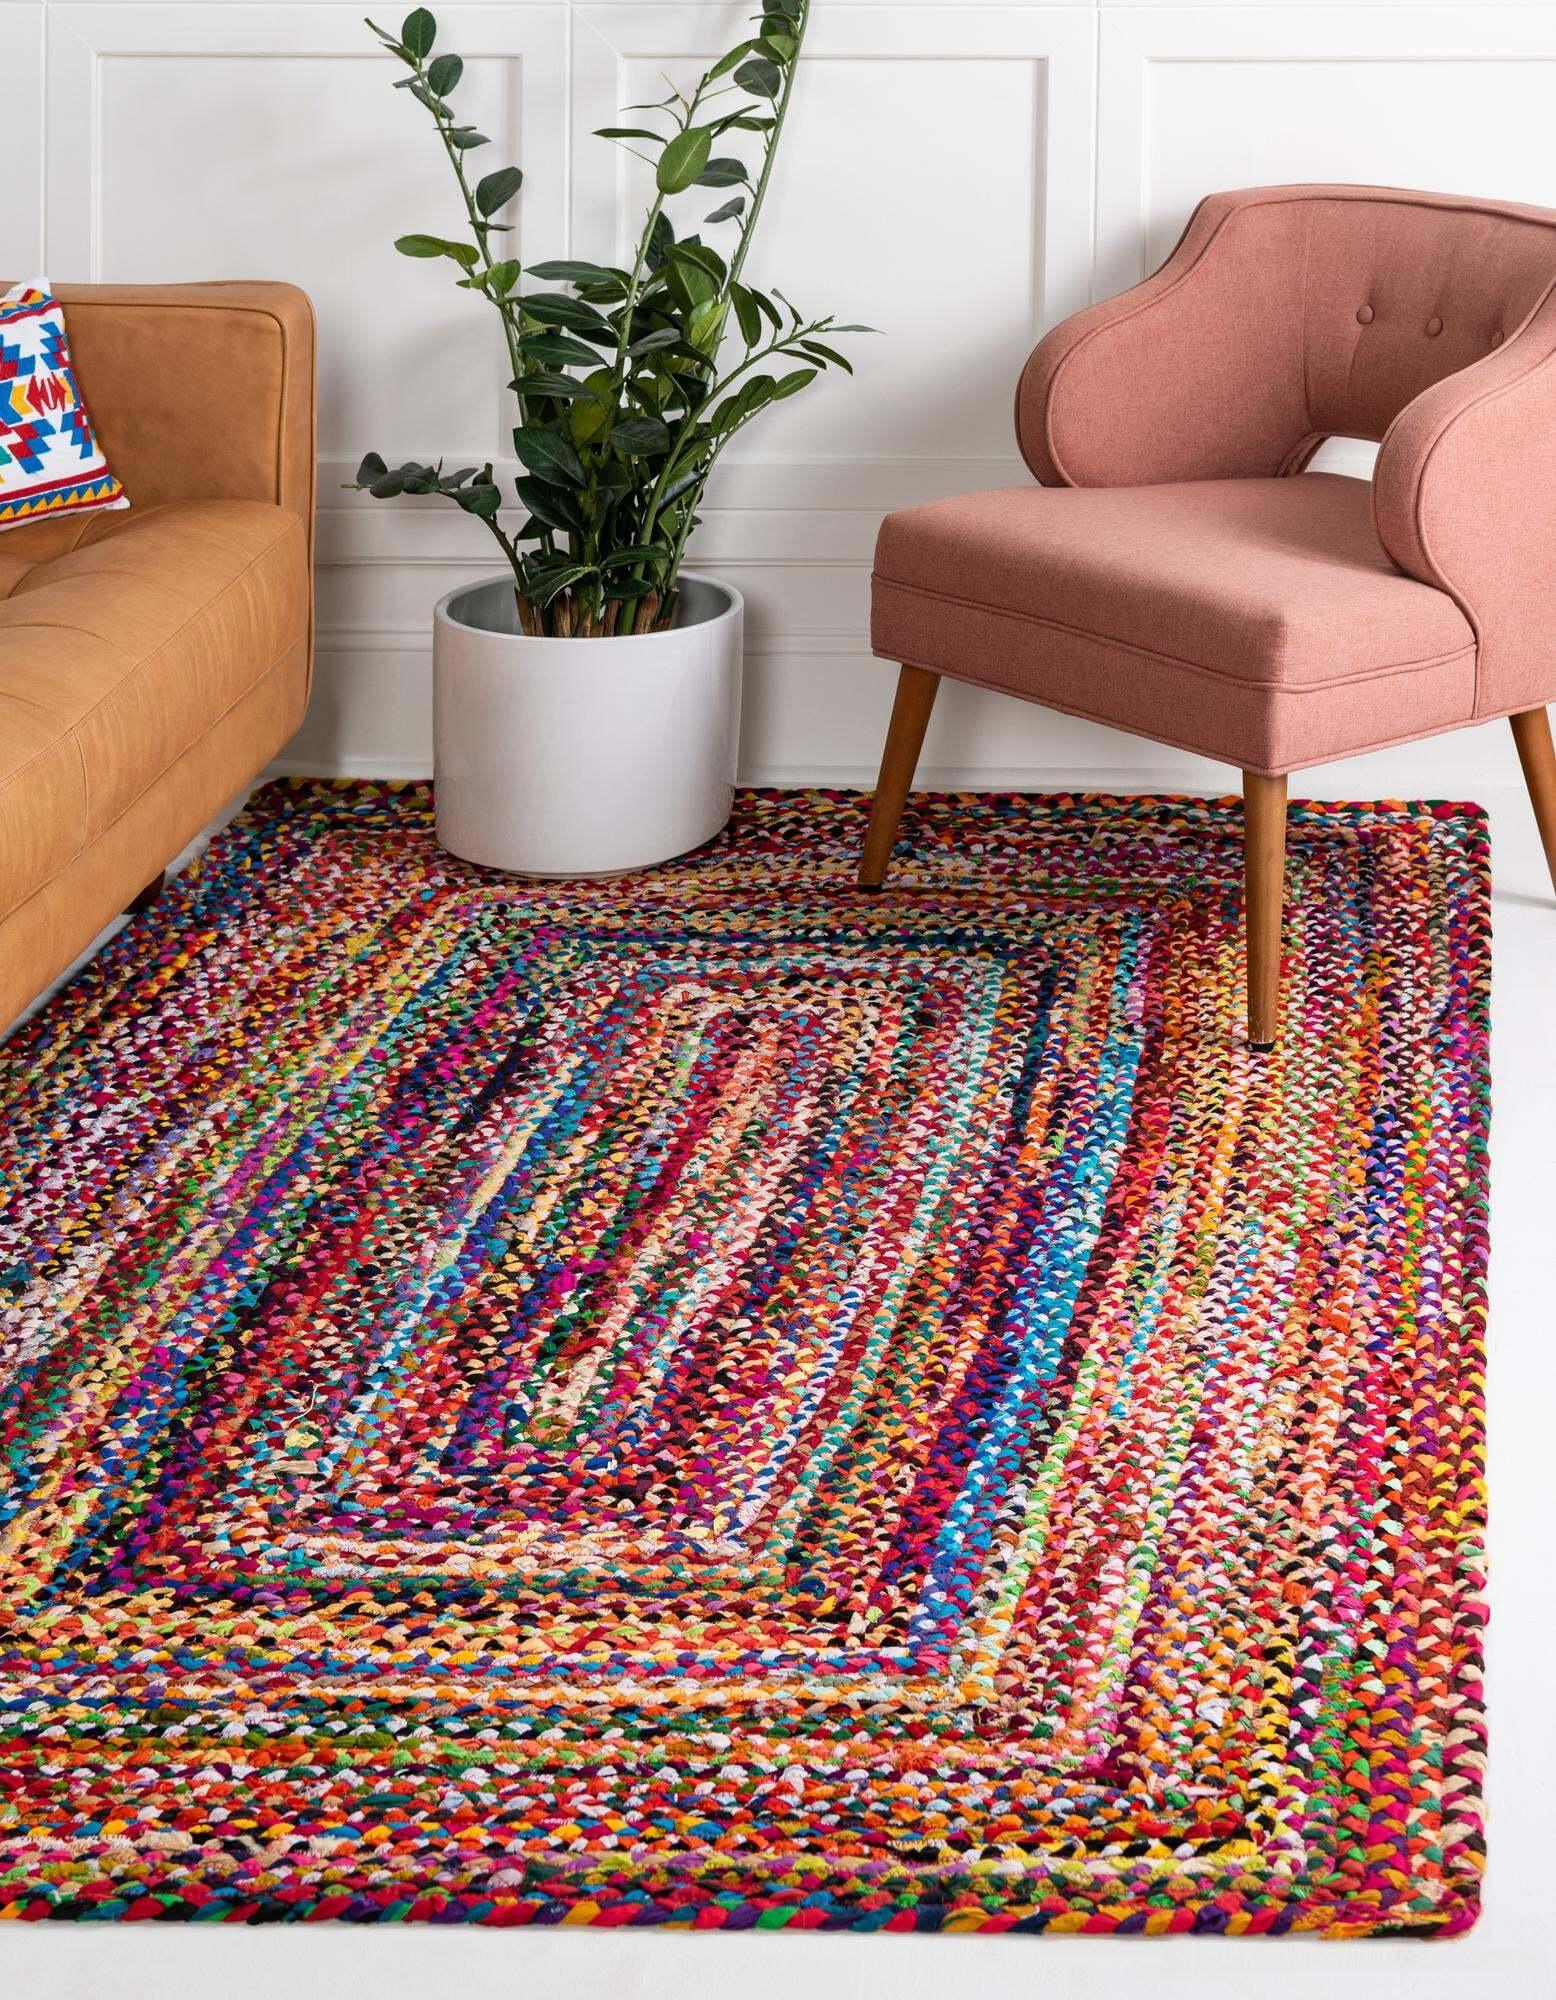 Unique Loom Indoor Rugs - Braided Chindi Abstract Rectangular 8x11 Rug Multi & Pink